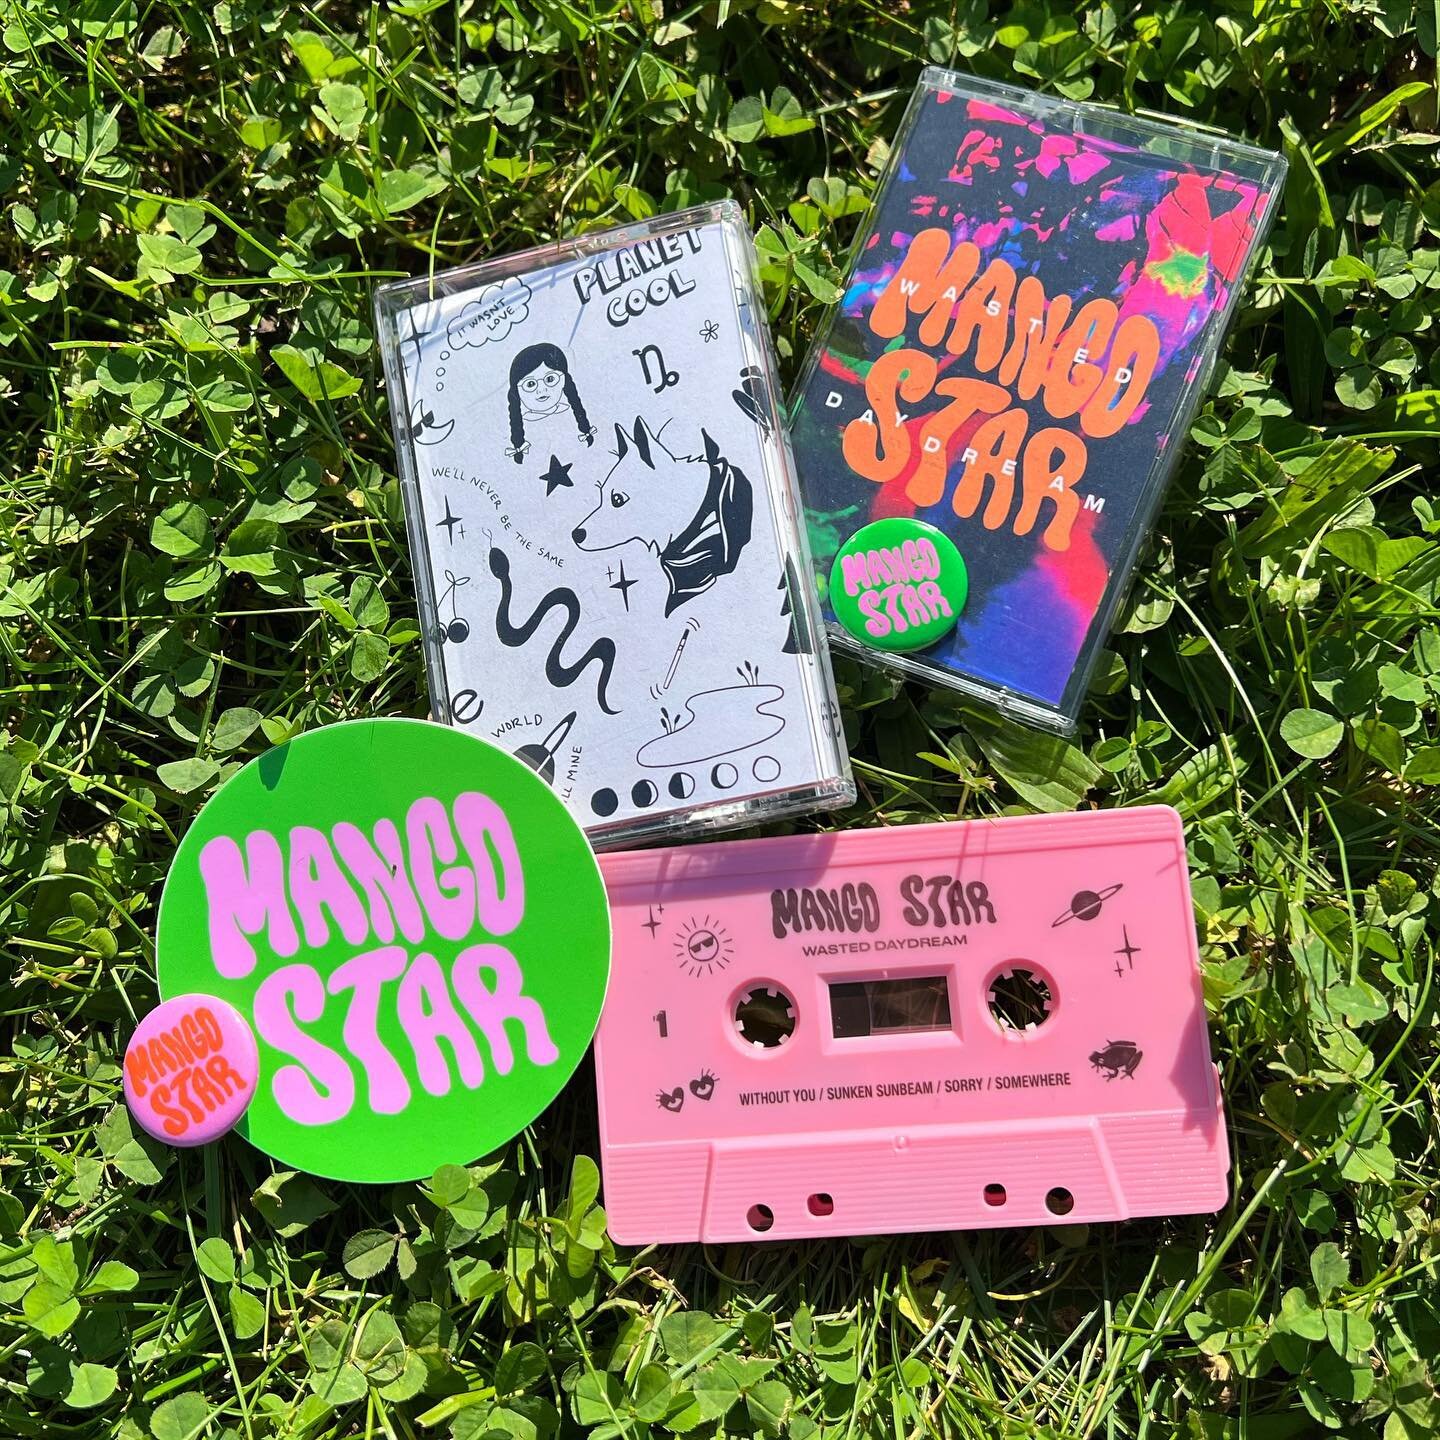 🪩🎀 limited # of tapes available IRL only 👀 8$ 🎀🪩